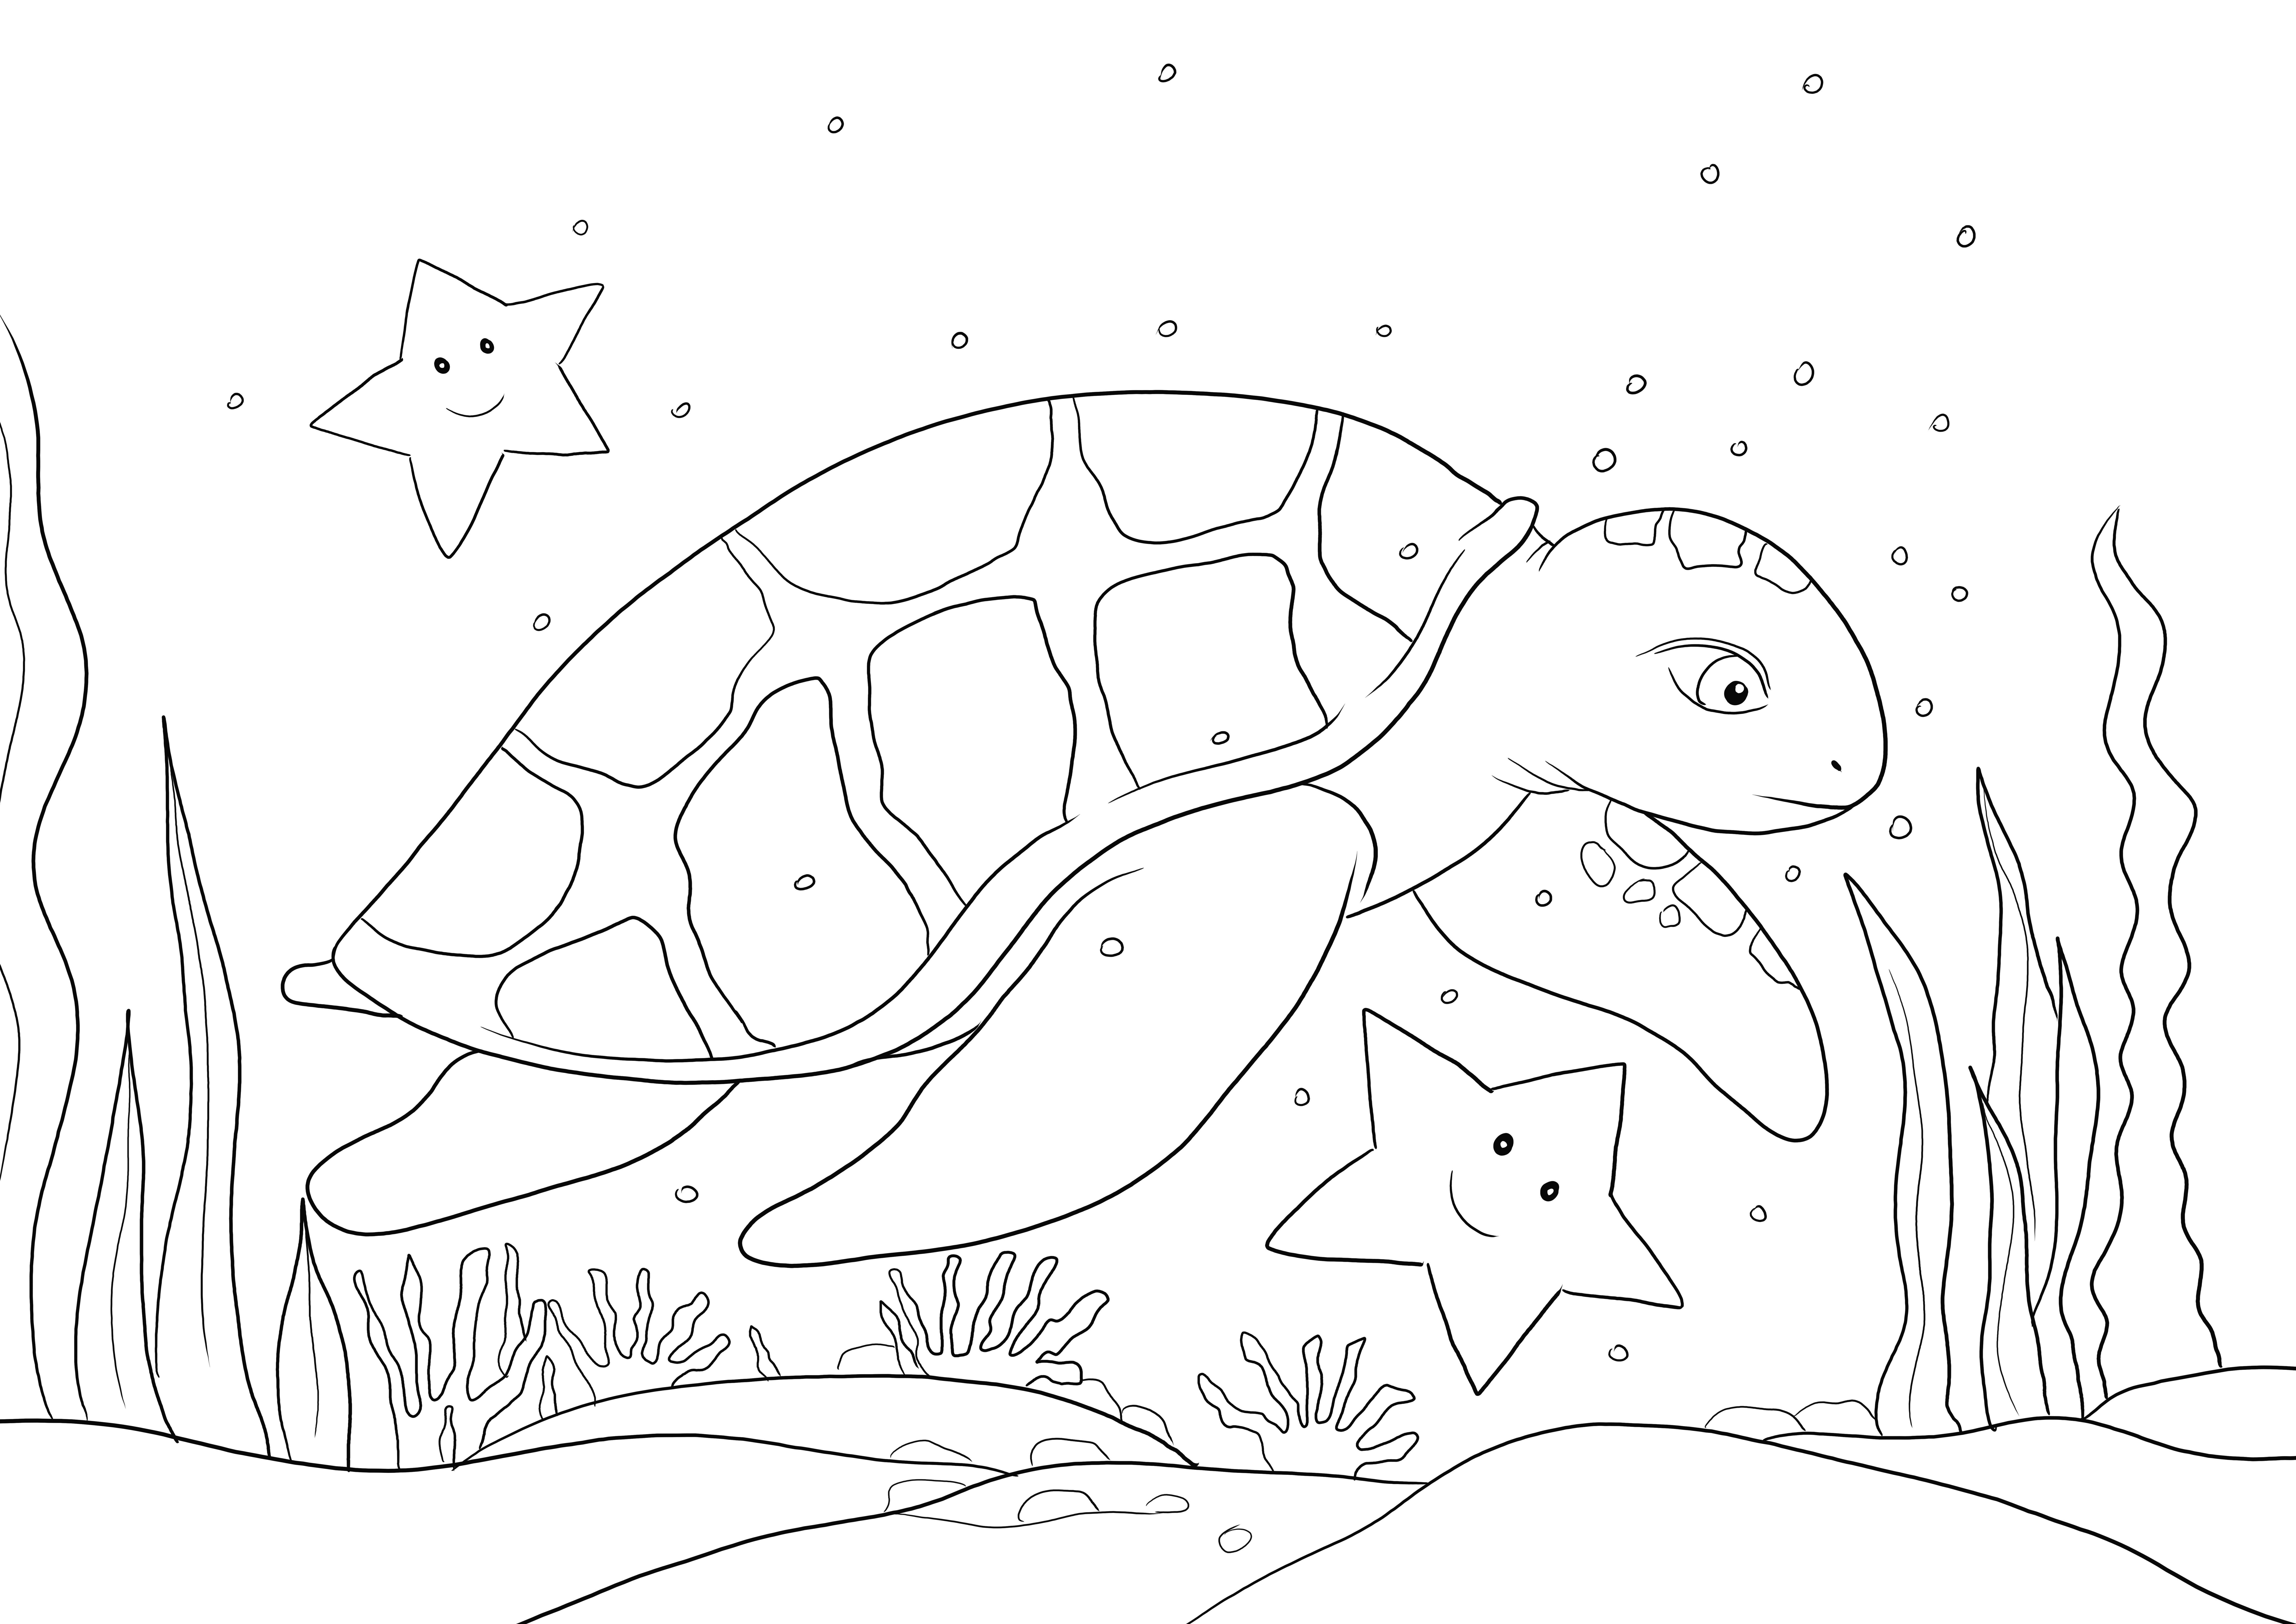 Sea Turtle coloring image free to print and easy to color